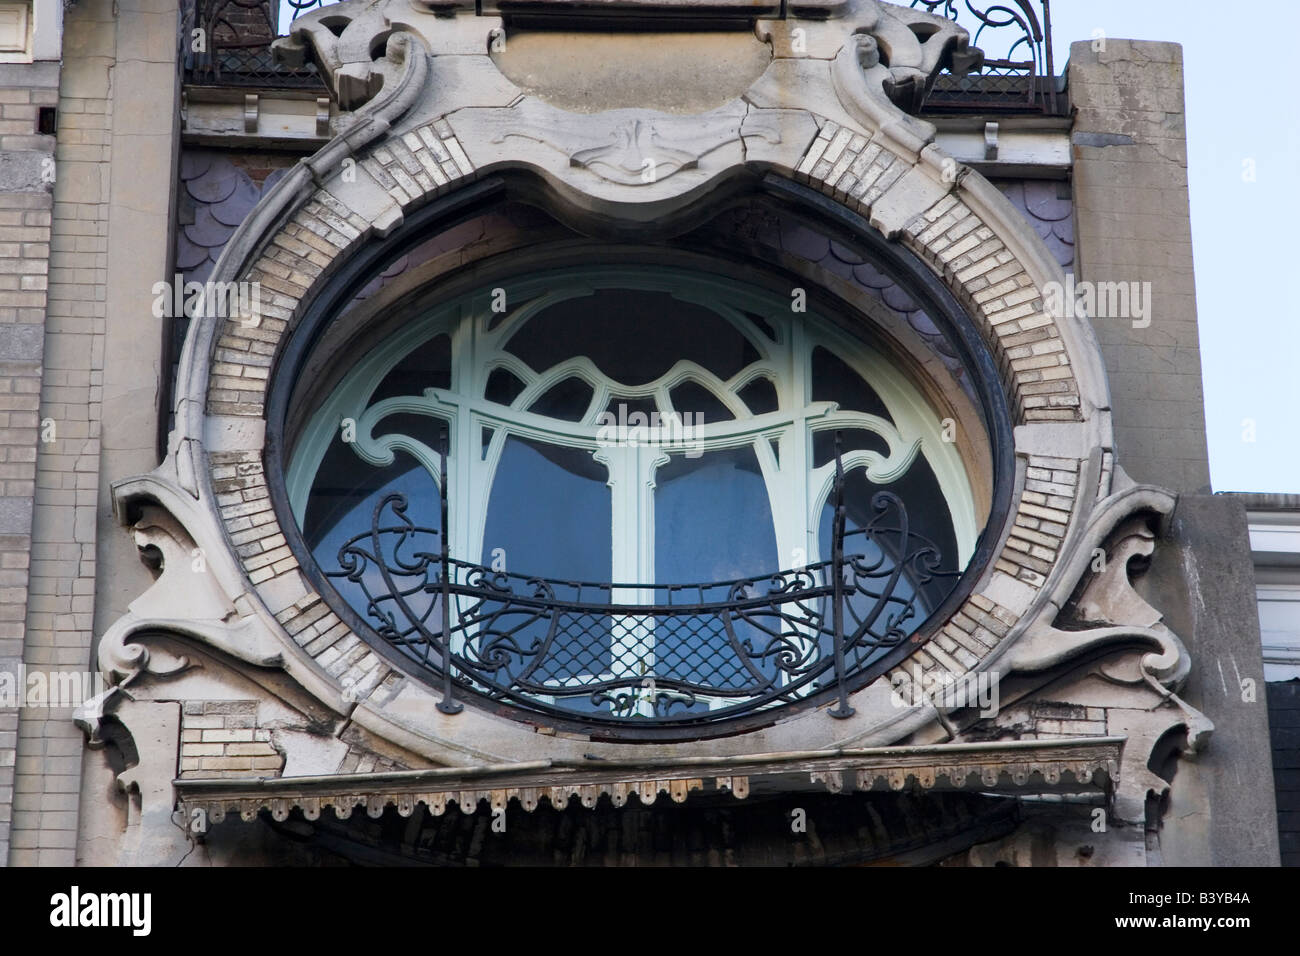 Art Nouveau building the Maison de St Cyr located on square Ambiorix designed by Gustave Strauven in 1905, Brussels, Belgium Stock Photo